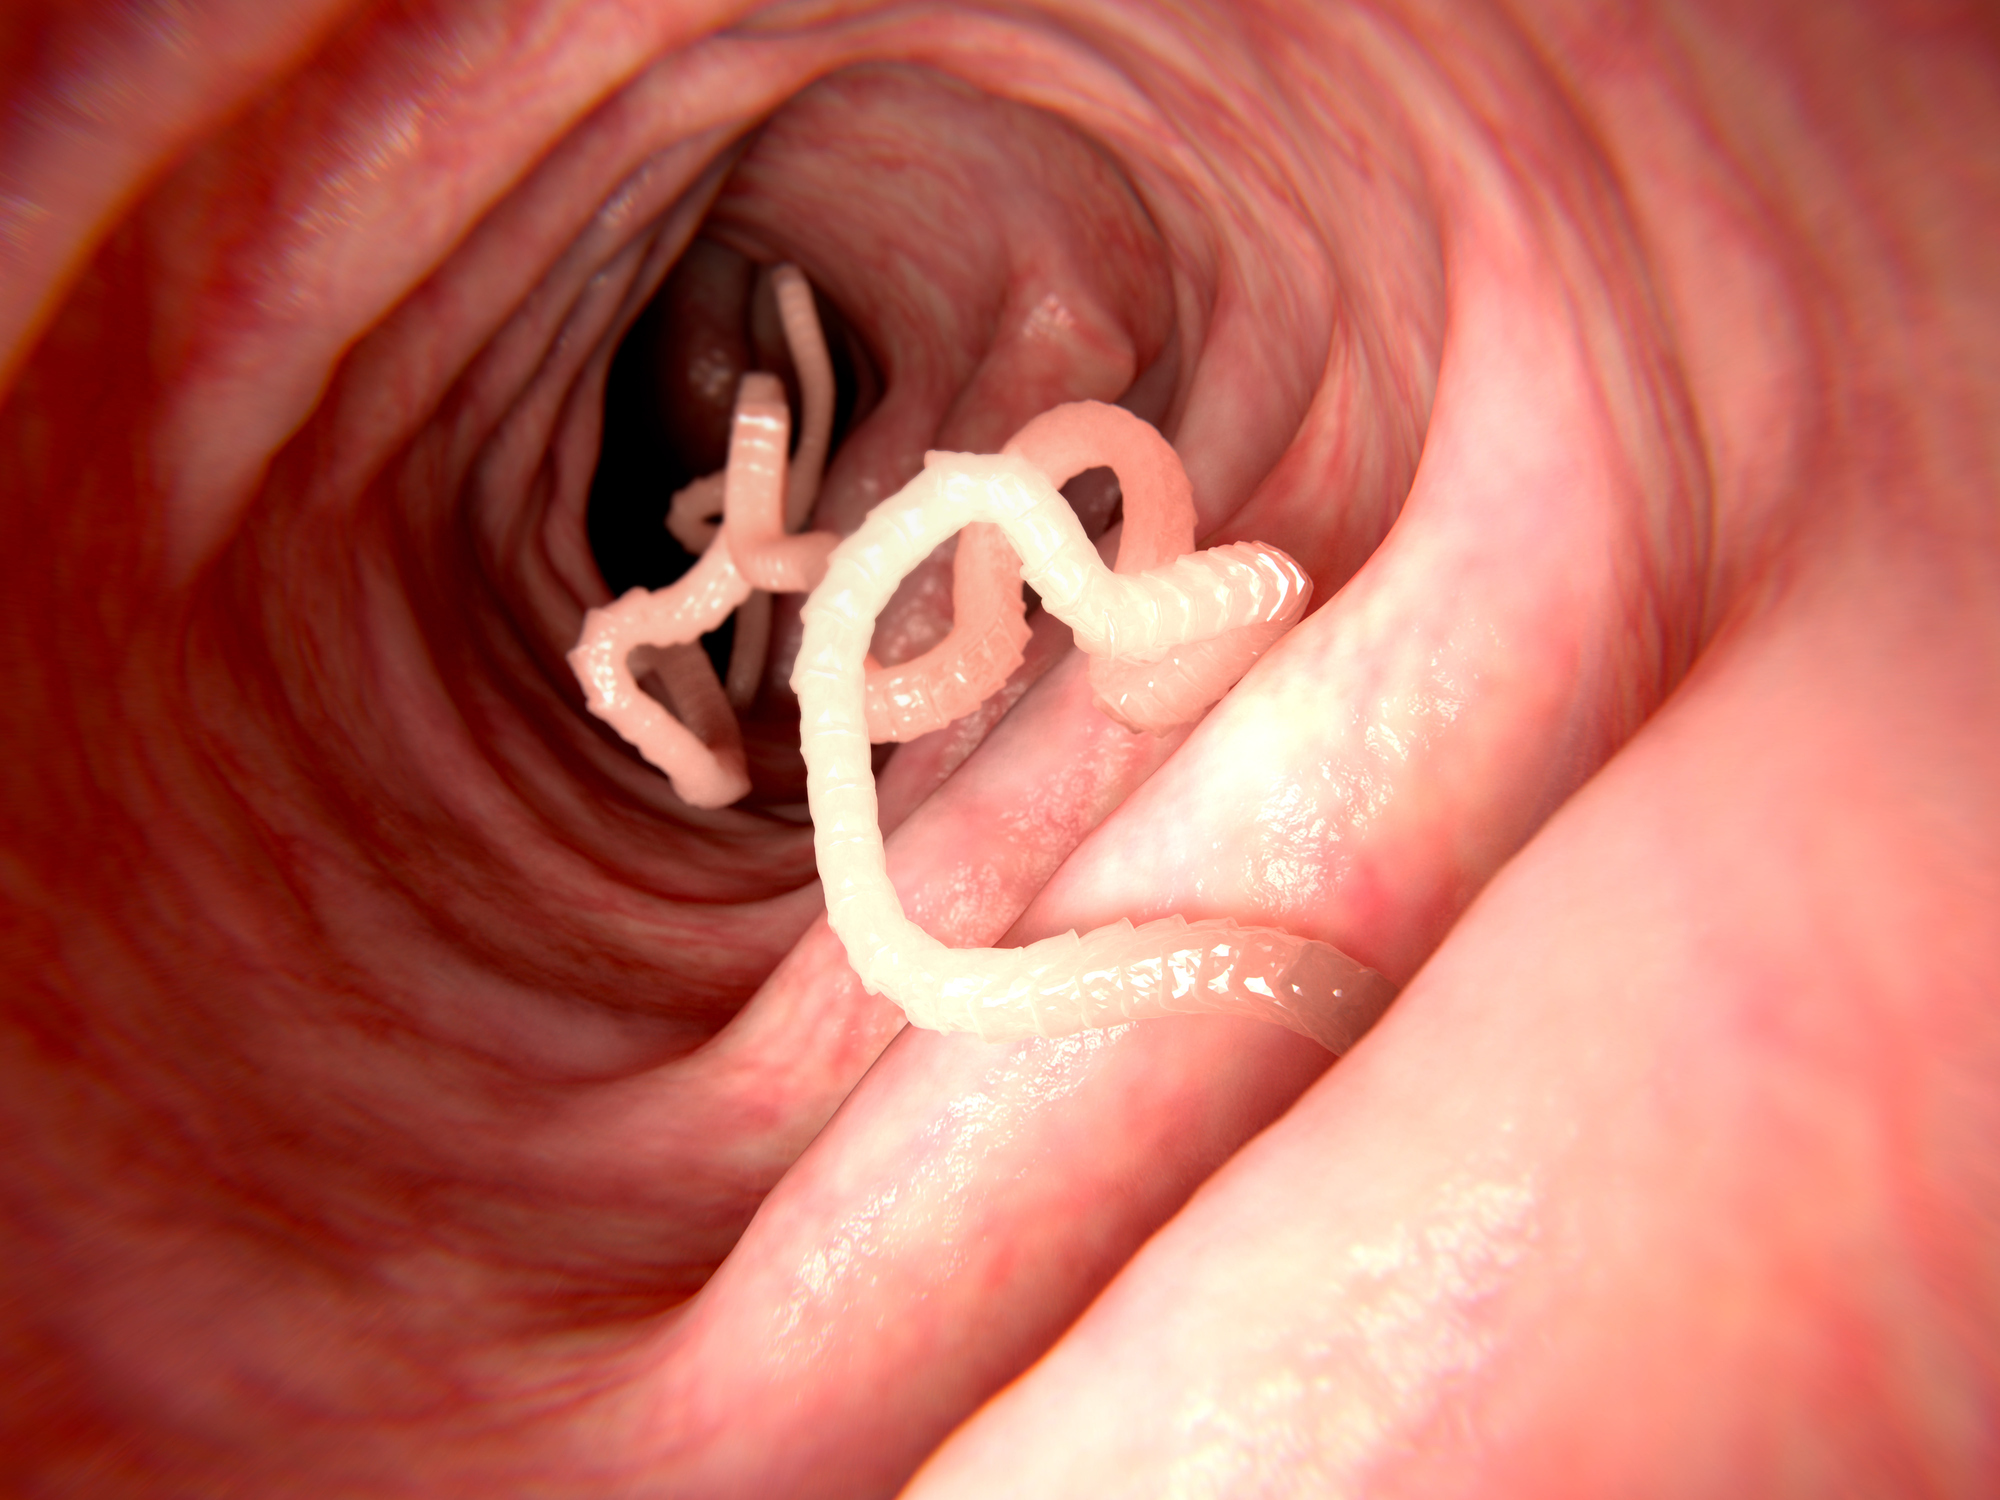 Chinese Man Hospitalized With 700 Tapeworms in His Brain After Eating